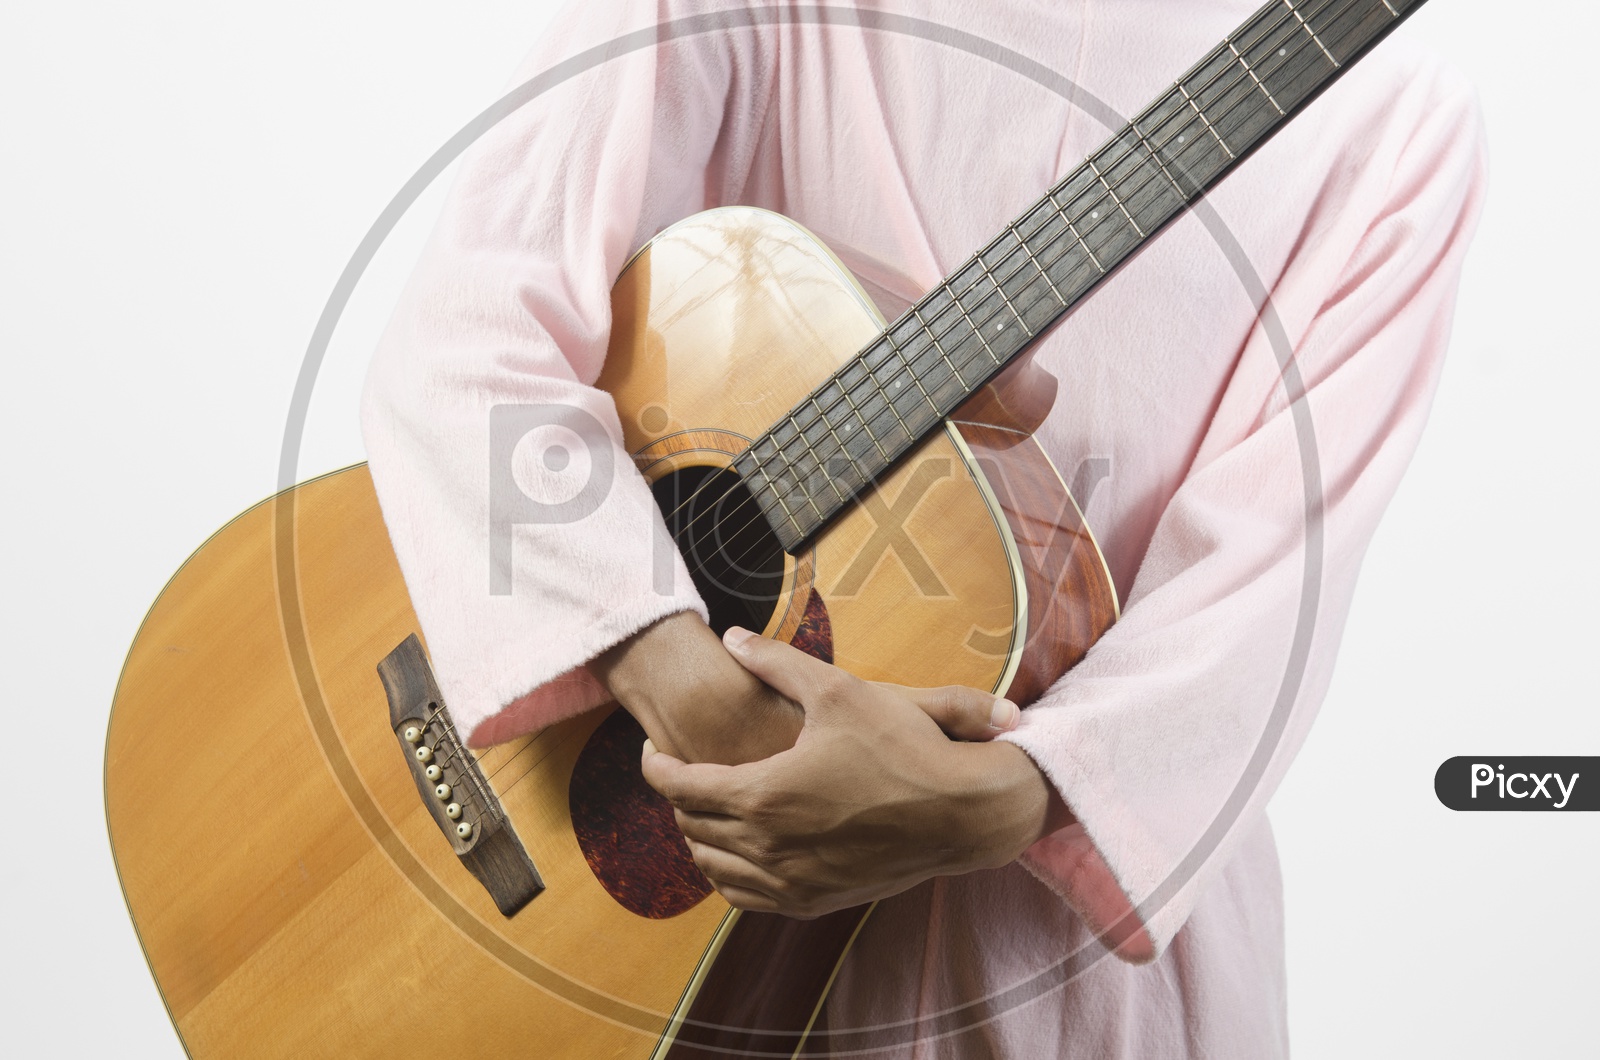 A Musician with guitar